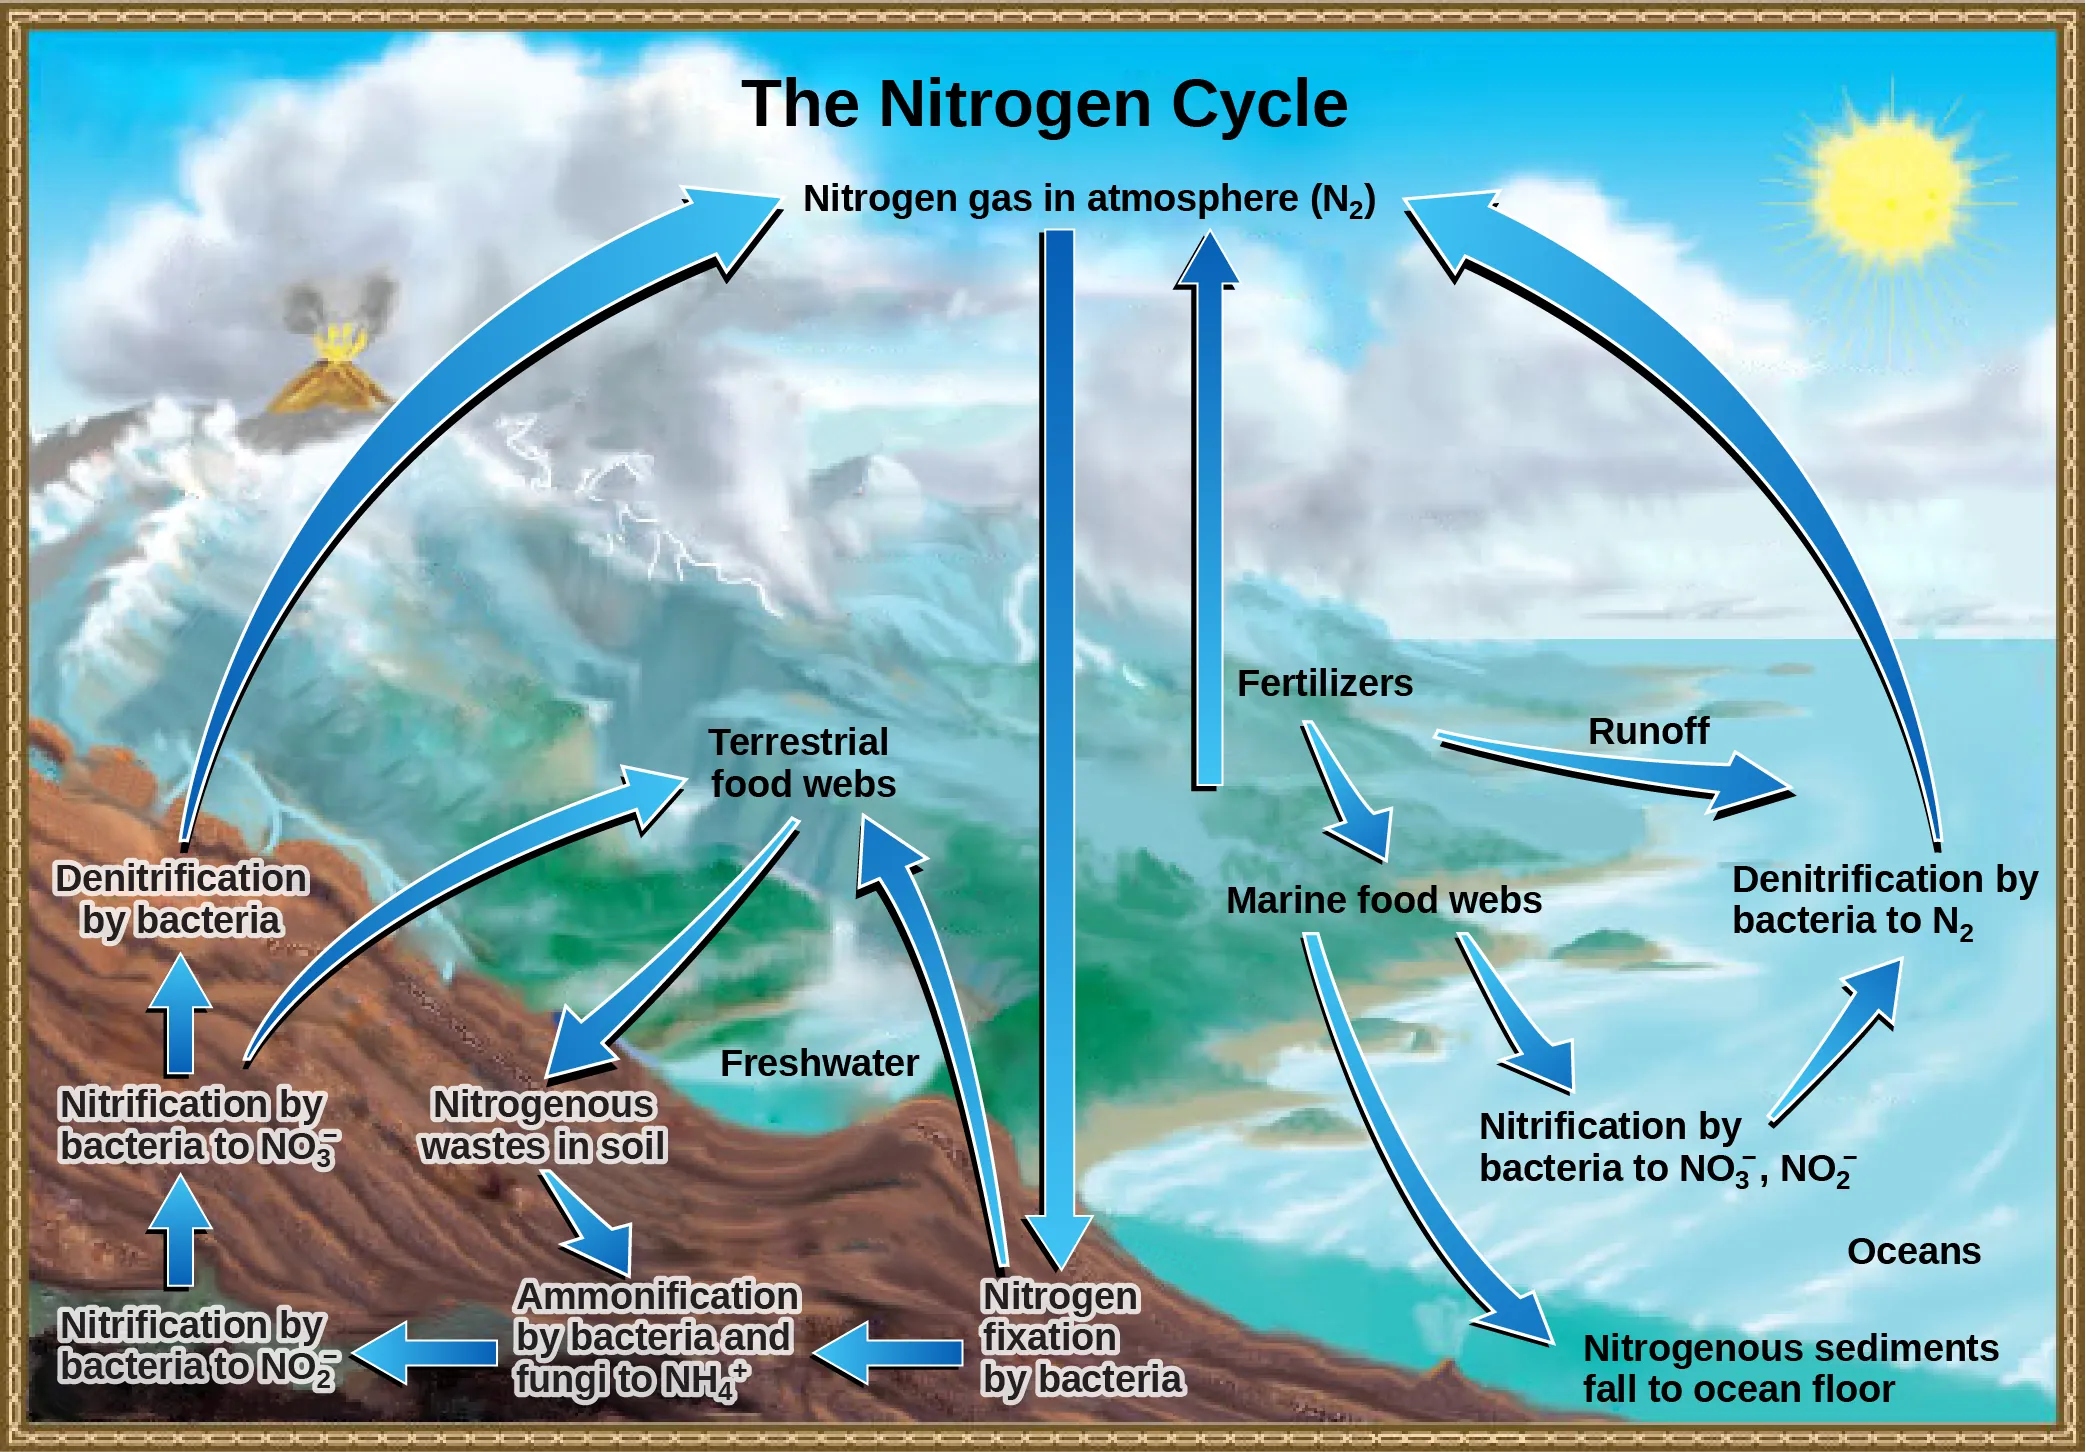 This illustration shows the nitrogen cycle. Nitrogen gas from the atmosphere is fixed into organic nitrogen by nitrogen-fixing bacteria. This organic nitrogen enters terrestrial food webs, and it leaves the food webs as nitrogenous wastes in the soil. Ammonification of this nitrogenous waste by bacteria and fungi in the soil converts the organic nitrogen to ammonium ion, or upper N upper H 4 plus. Ammonium is converted to nitrite, or upper N upper O 2 minus, then to nitrate, or upper N upper O 3 minus by nitrifying bacteria. Denitrifying bacteria convert the nitrate back into nitrogen gas, which re-enters the atmosphere. Nitrogen from runoff and fertilizers enters the ocean, where it enters marine food webs. Some organic nitrogen falls to the ocean floor as sediment. Other organic nitrogen in the ocean is converted to nitrite and nitrate ions, which is then converted to nitrogen gas in a process analogous to the one that occurs on land.